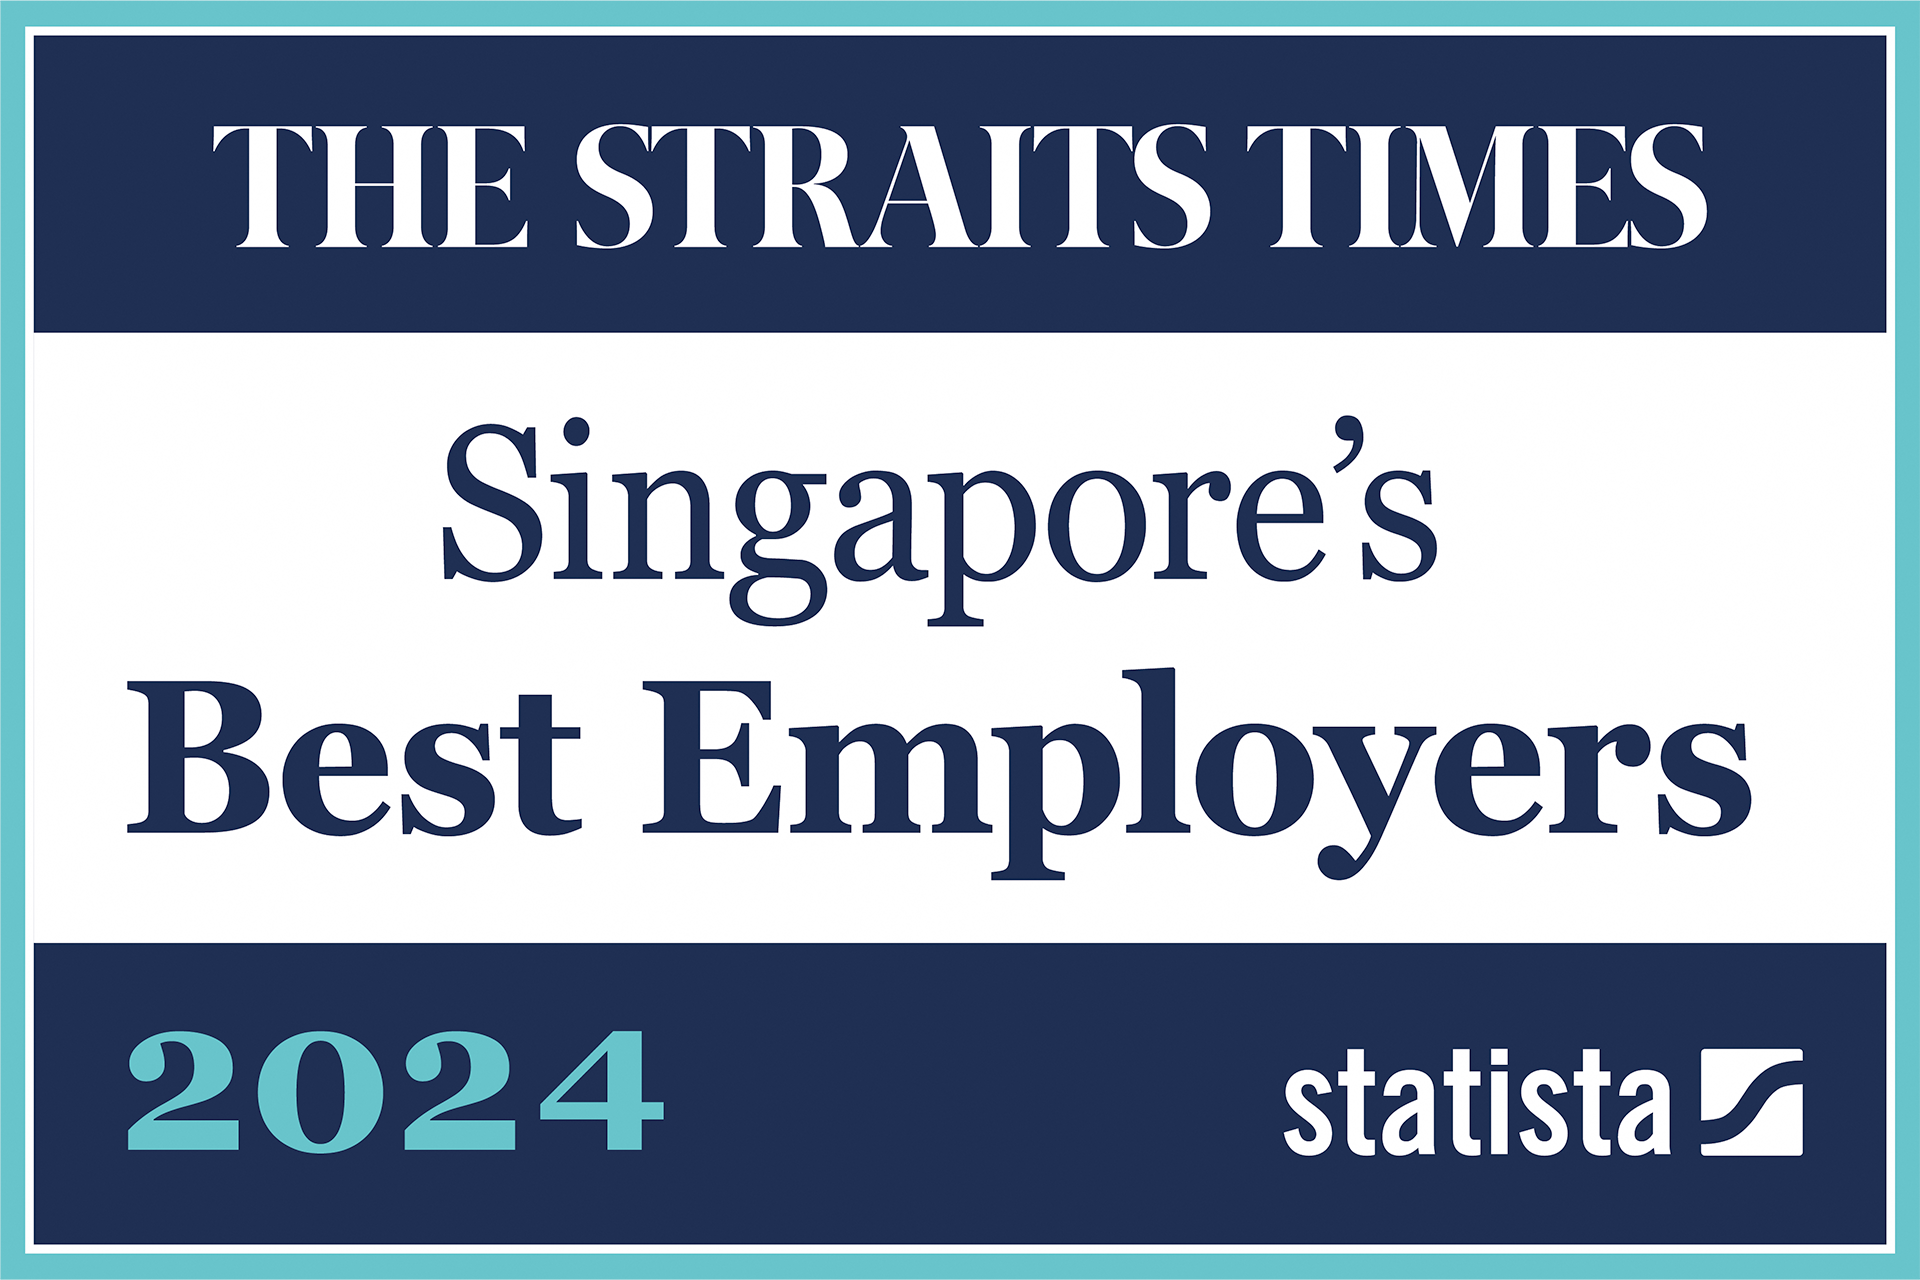 Singapore's Best Employers 2024 by The Straits Times